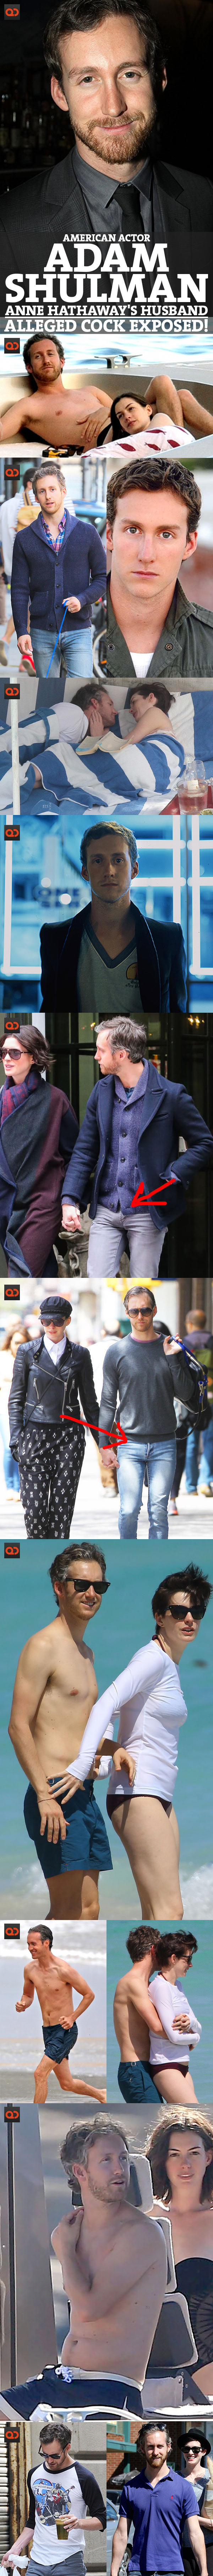 Adam Shulman, American Actor And Anne Hathaway's Husband, Alleged Cock Exposed!